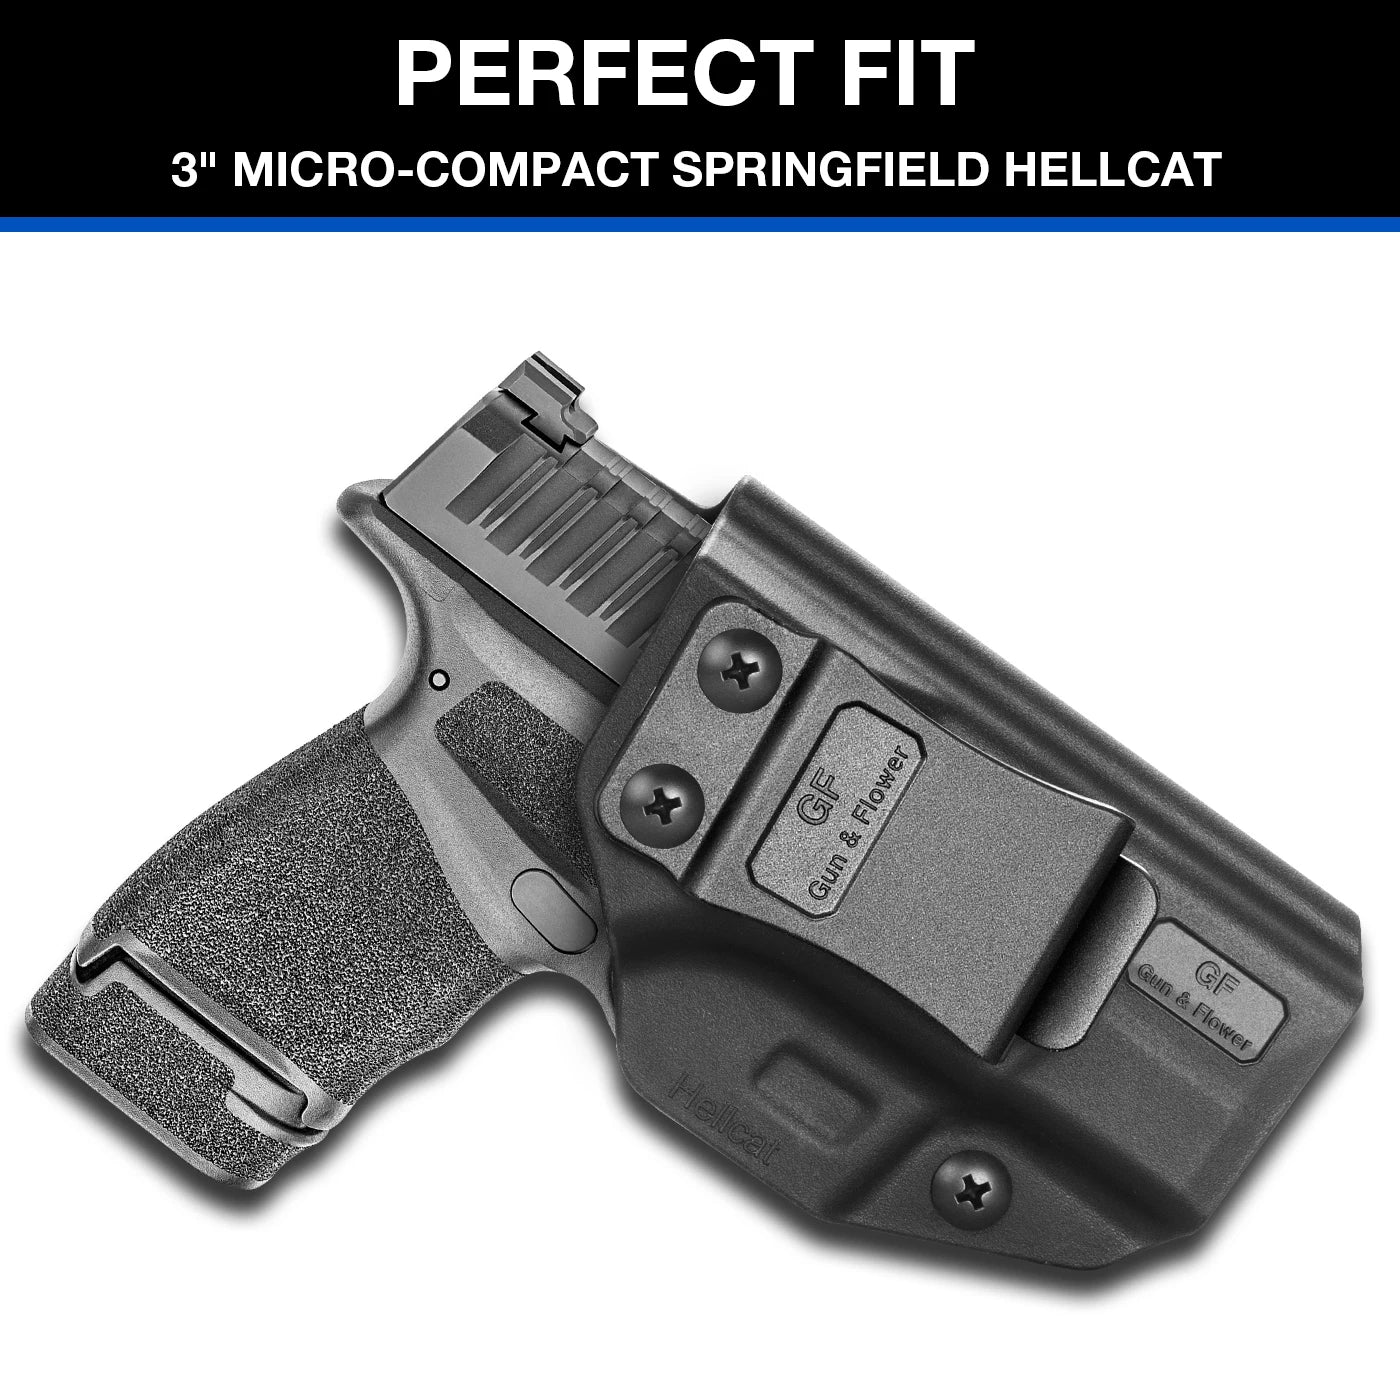 Hellcat Holster IWB KYDEX Holster Fit: Springfield Armory Hellcat Pistol, Inside Waistband Concealed Carry Holster for Hellcat, Adj. Cant & Retention, Right Hand/Left Hand Optional